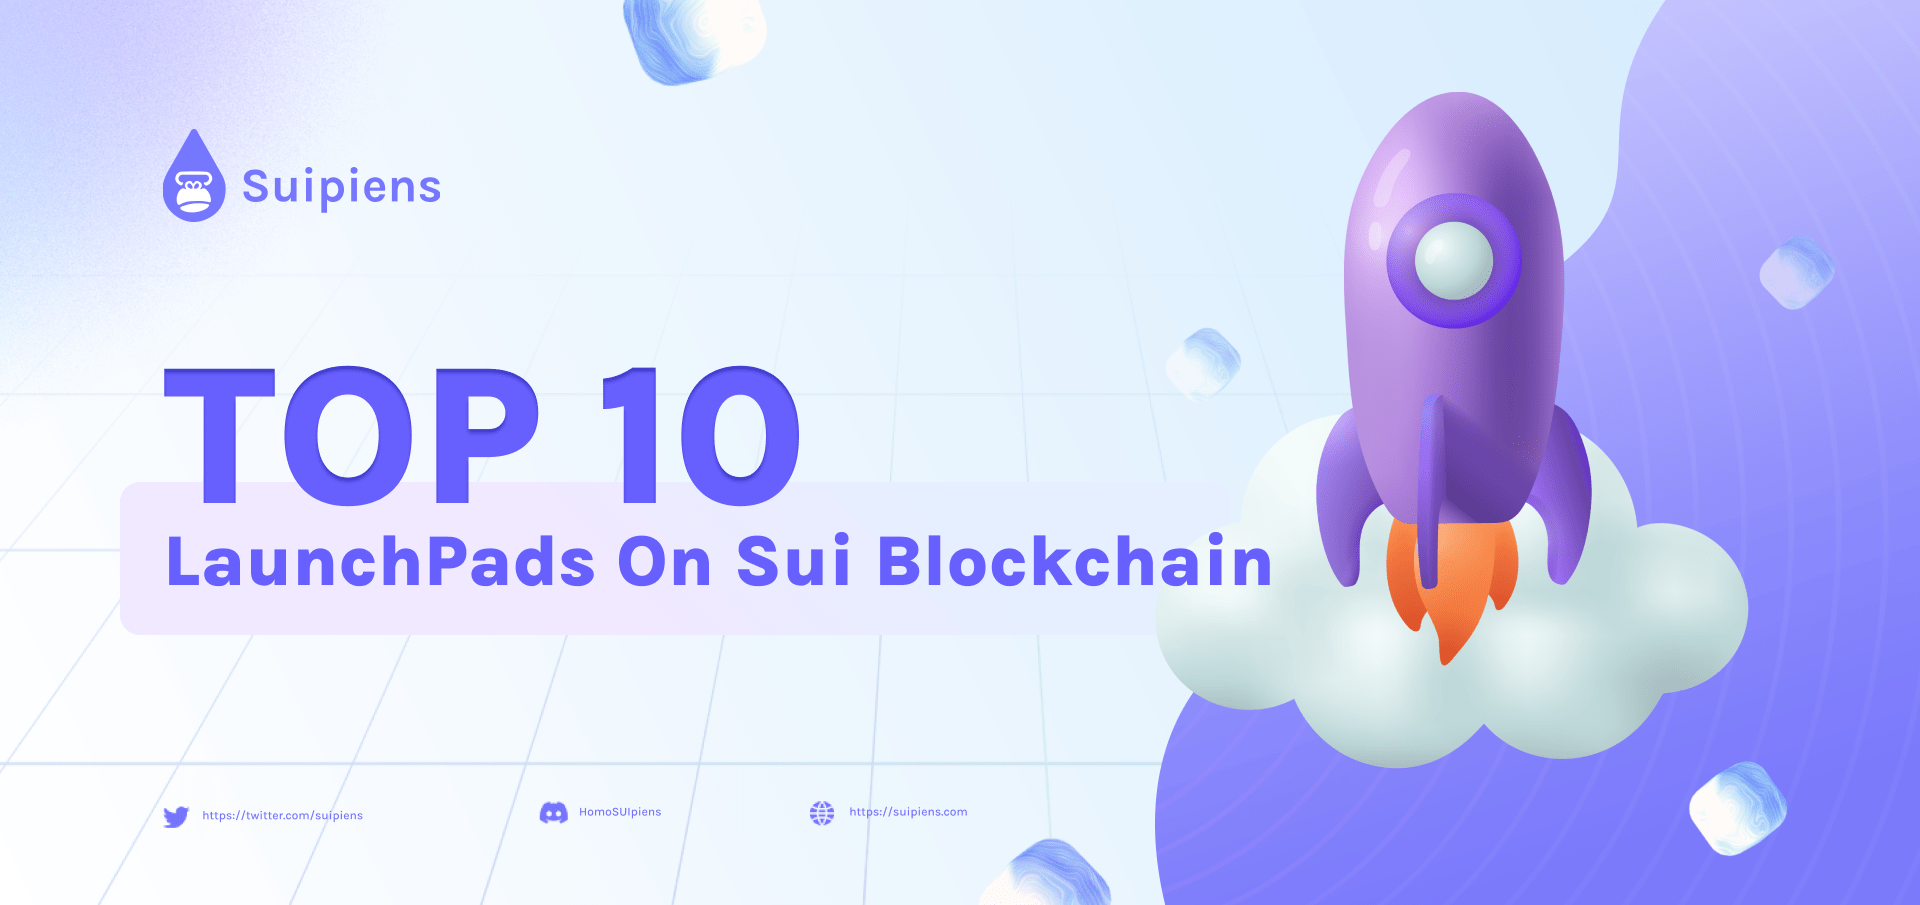 Top 10 LaunchPads On Sui Blockchain